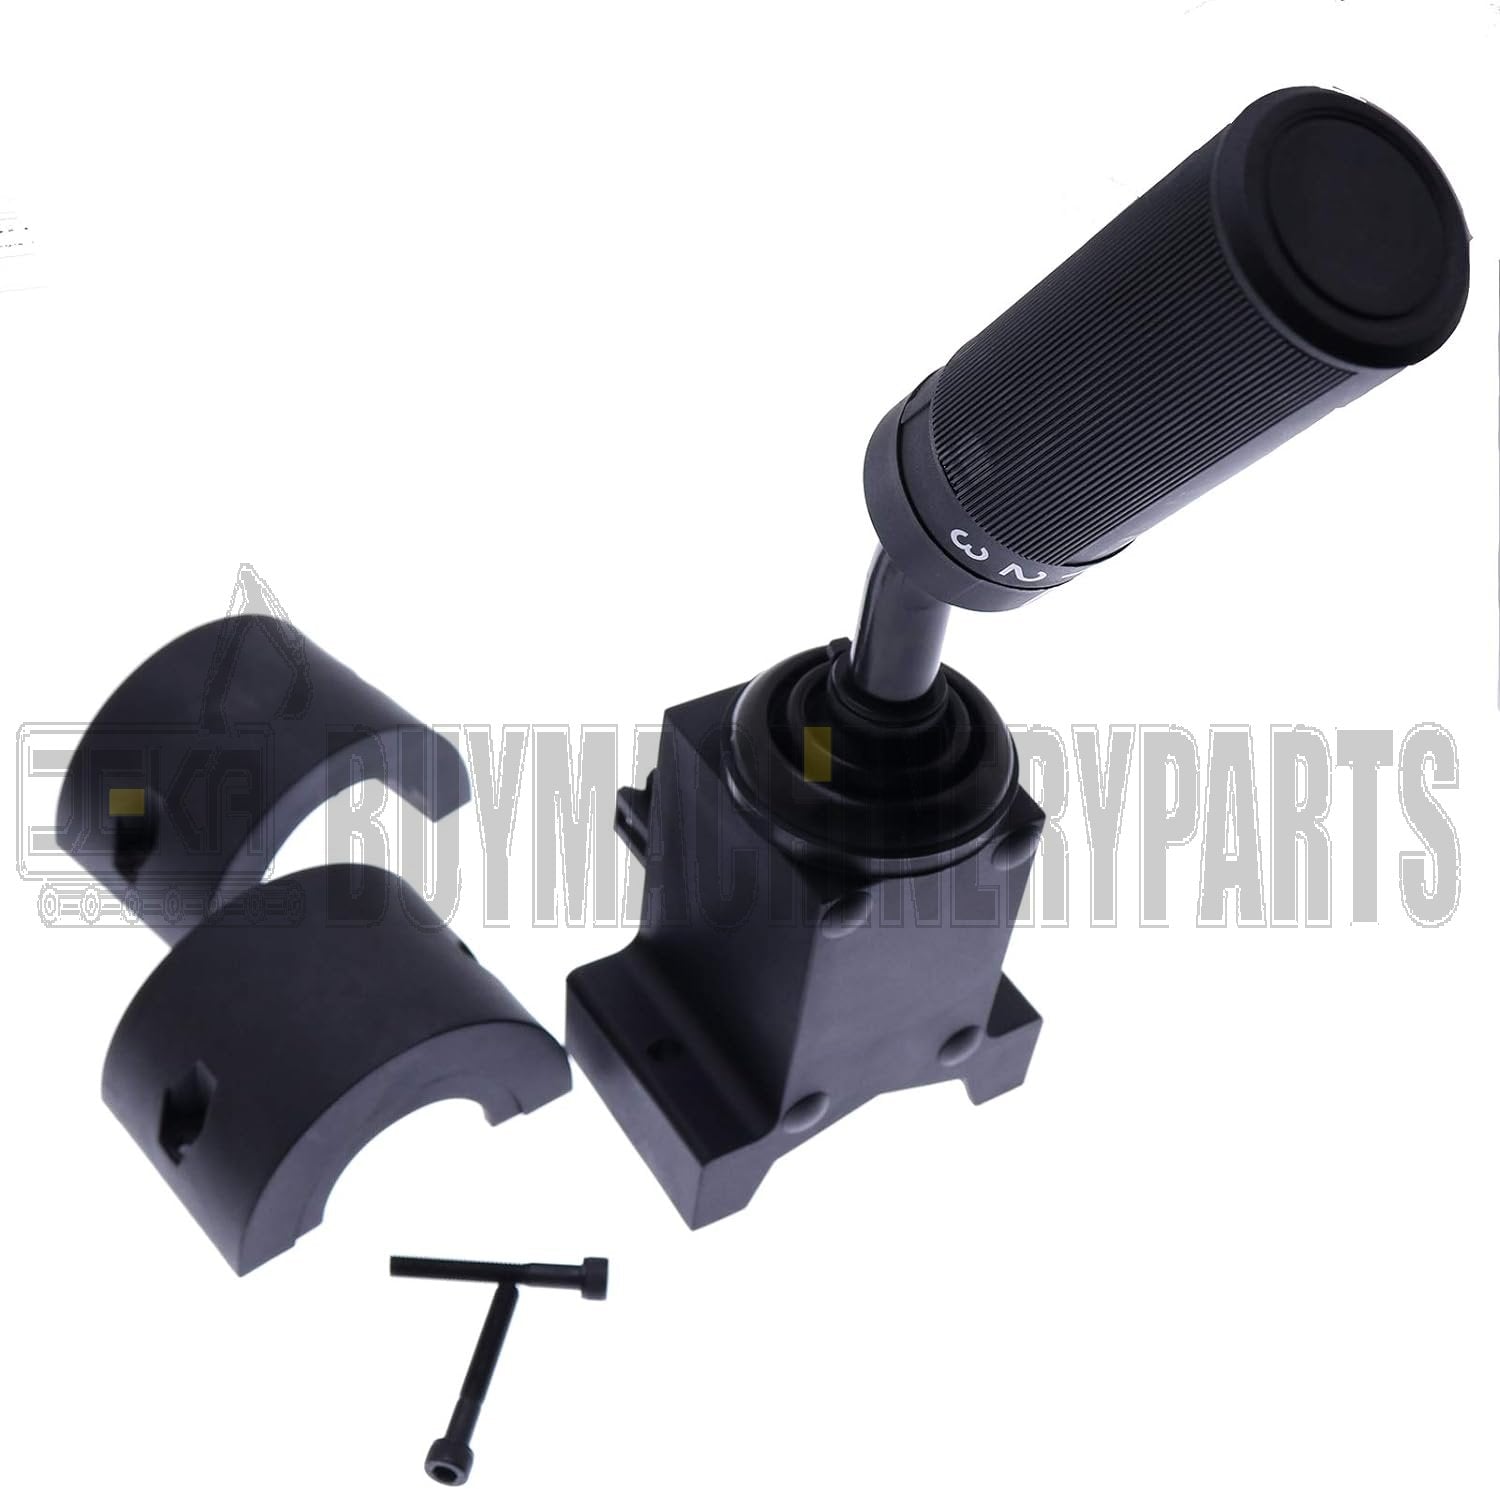 Shift Lever Transmission Shifter Assembly 7-125-05GT 7-125-05 81485 317114A1 For Genie Telehandler TH1048C TH1056C TH636C TH644C TH842C TH844C GTH-636 GTH-644 GTH-842 GTH-844 GTH-1048